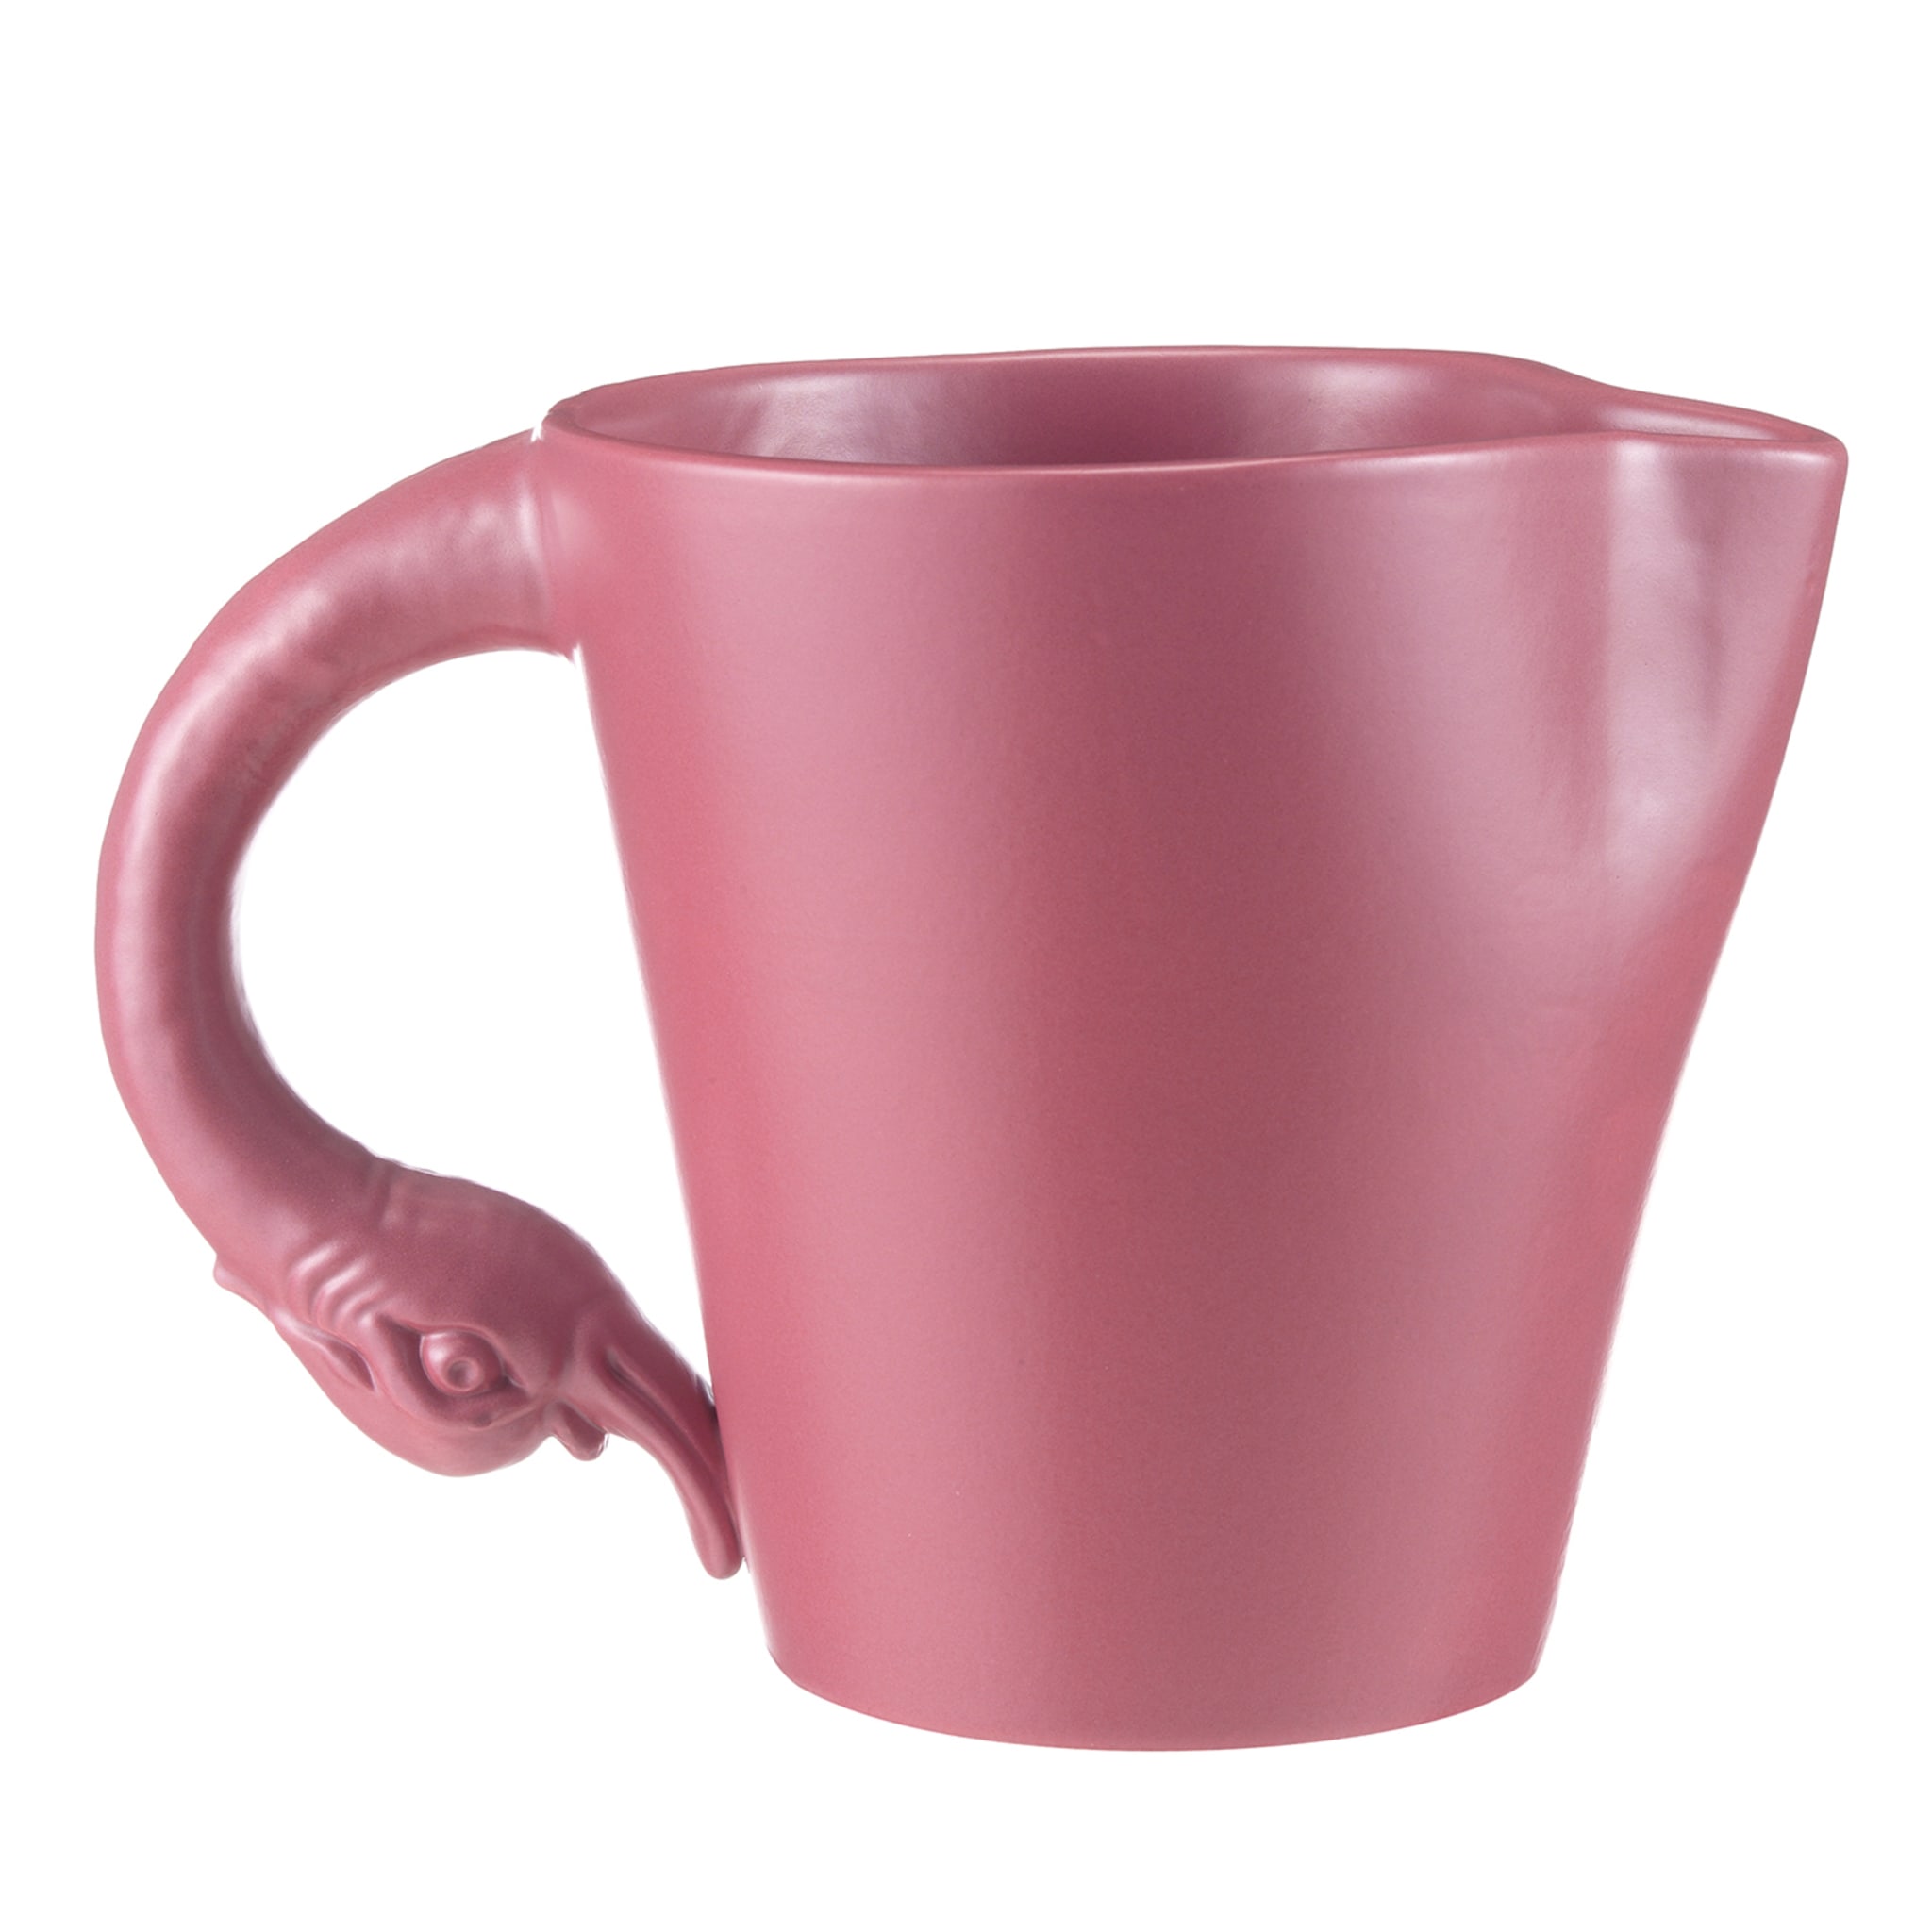 Medium Pitcher with Duck handle - Main view